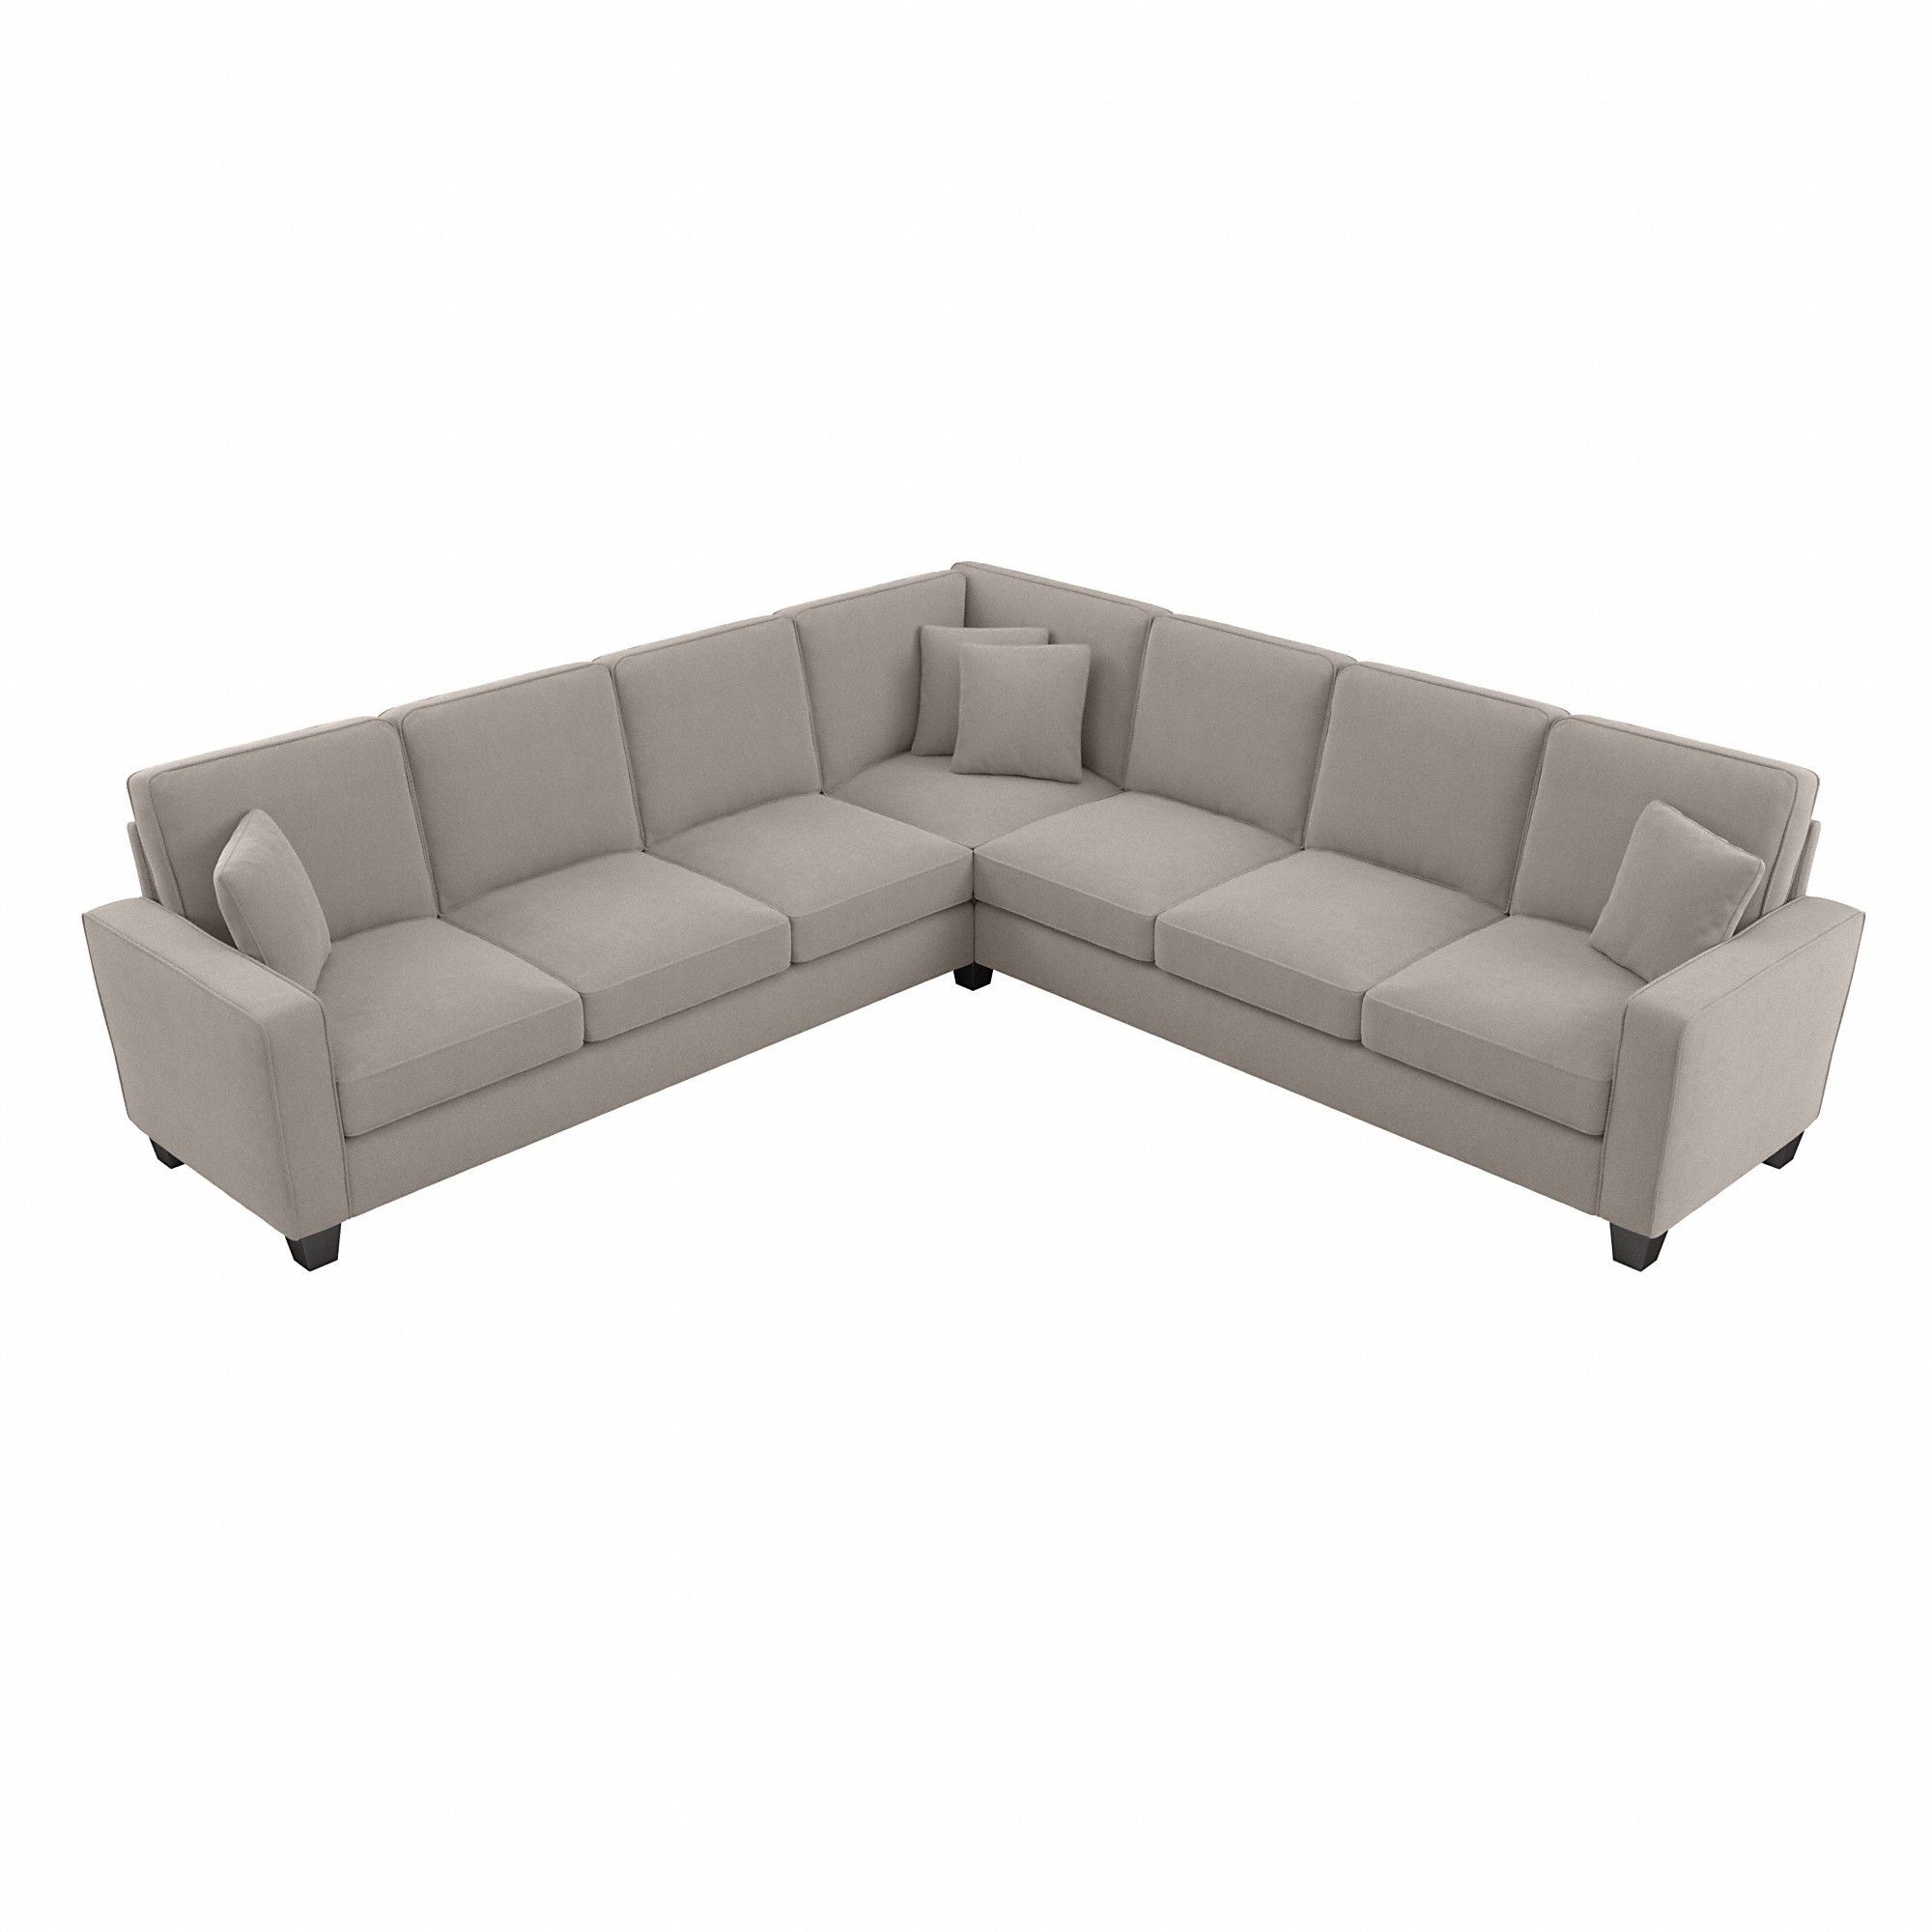 Furniture Stockton 110w L Shaped Sectional Couch In Beige Herringbone Regarding Beige L Shaped Sectional Sofas (View 6 of 20)